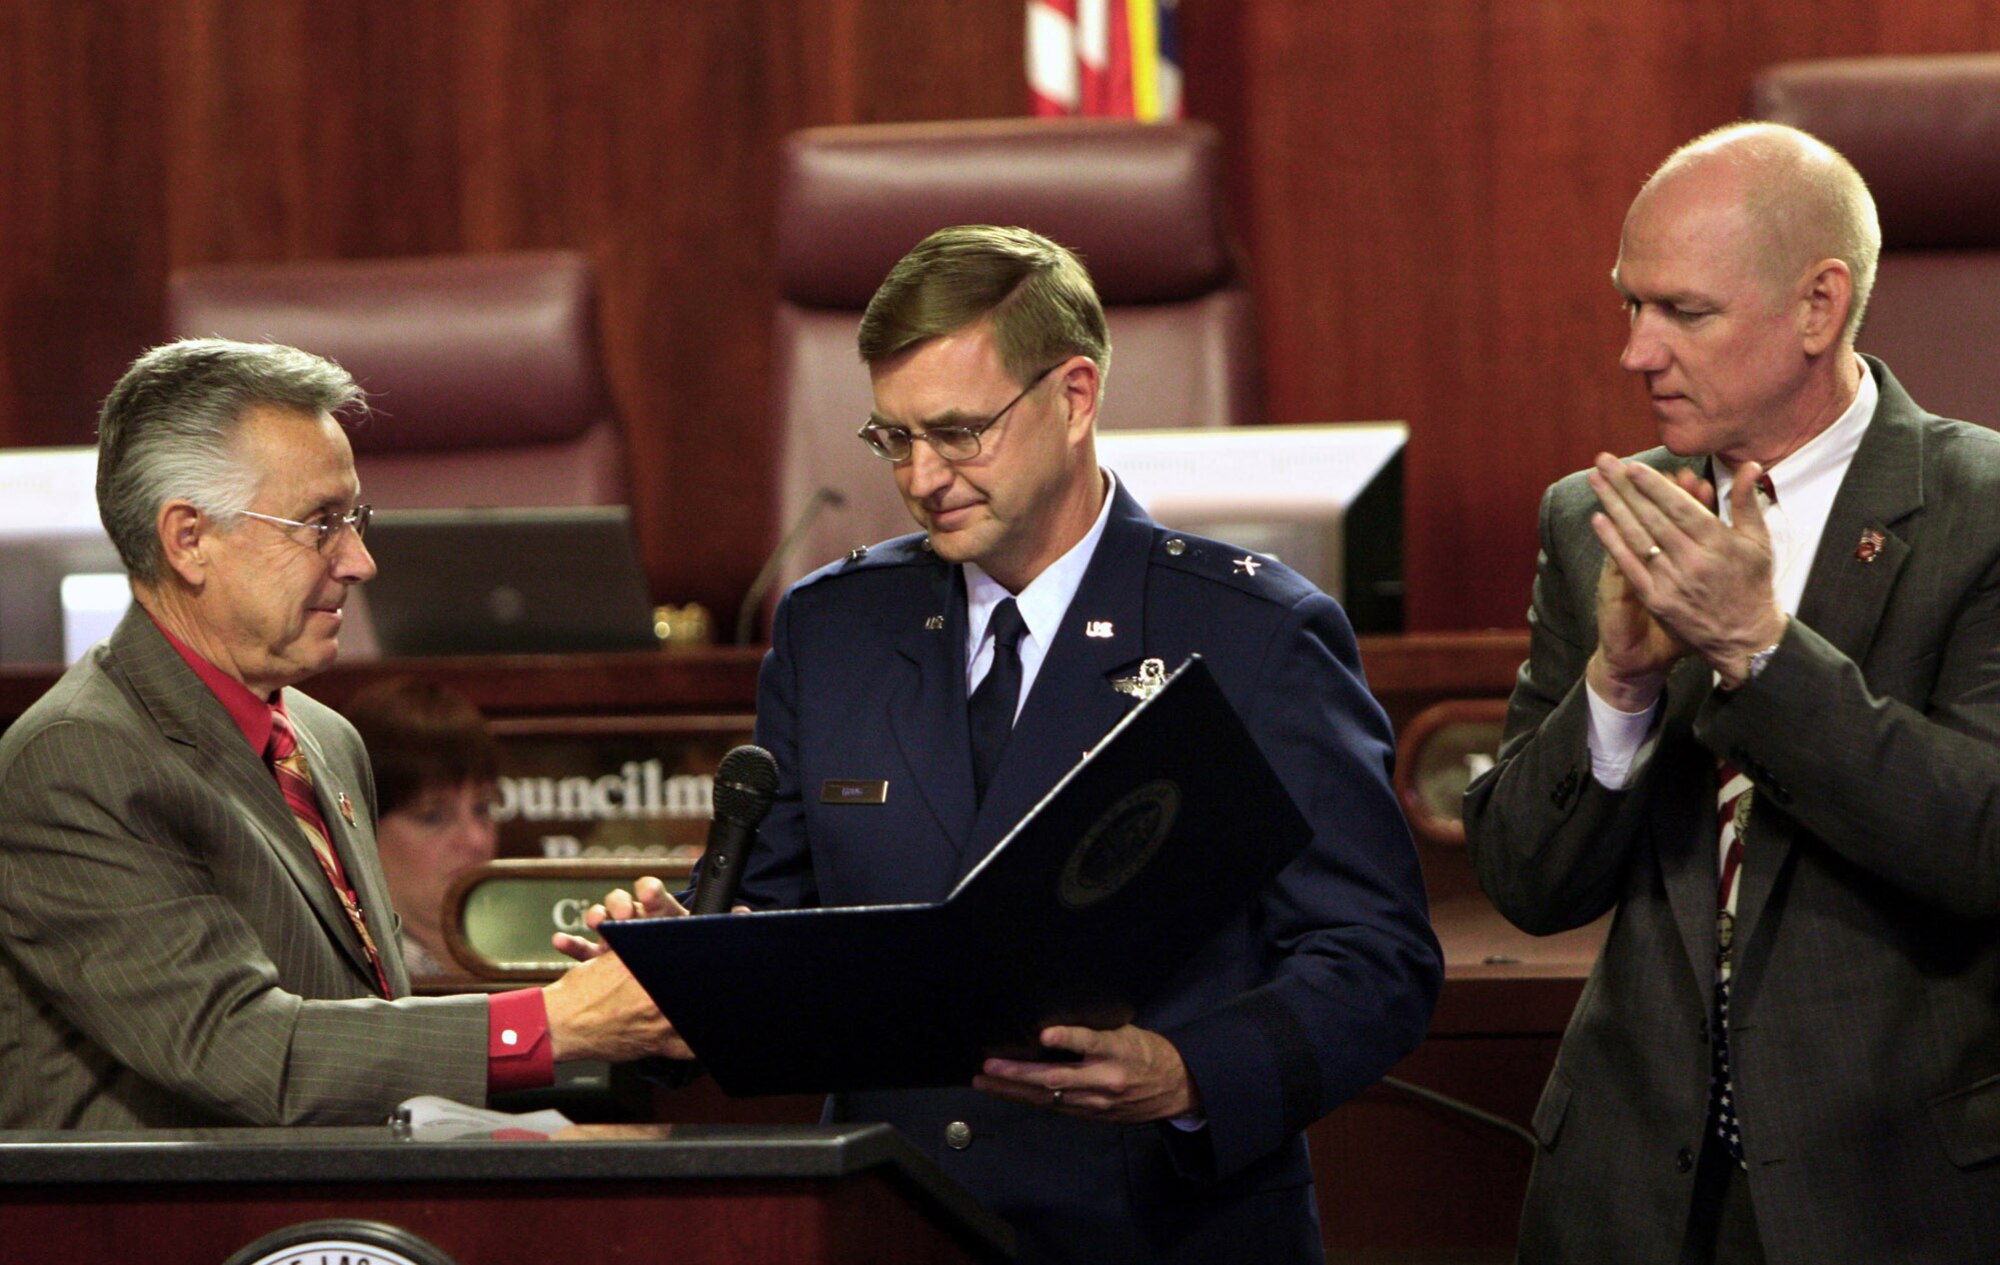 City of Las Vegas Mayor Pro Tem Gary Reese presents a proclamation to Brig. Gen. Stephen L. Hoog as Councilman Larry Brown looks on Nov. 7 in Las Vegas. The proclamation recognizes the 60th anniversary of the Air Force and proclaimed Nov. 5 through 11 as Air Force Week in Nevada. Air Force officials hosted several events to commemorate the occasion culminating in the Nellis Aviation Nation Air Show Nov. 10 and 11. General Hoog is the 57th Wing commander at Nellis Air Force Base, Nev. (U.S. Air Force photo/Lawrence Crespo)
